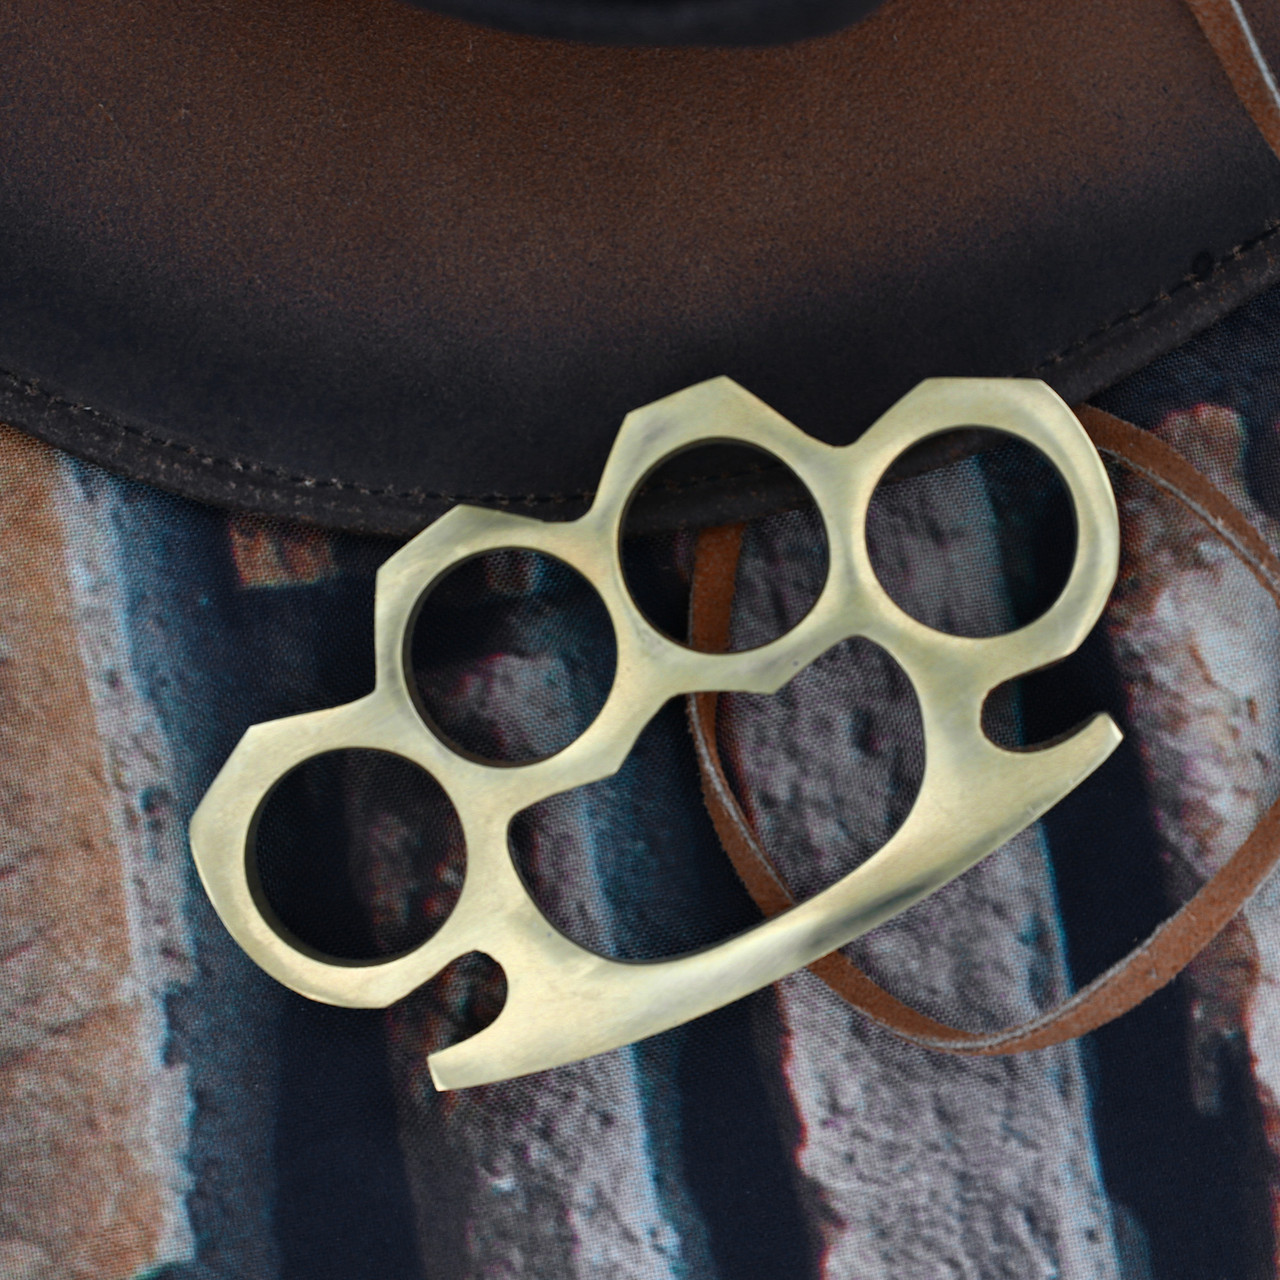  100% Solid Brass Classic Knuckle Duster Novelty Paper Weight Knuckles